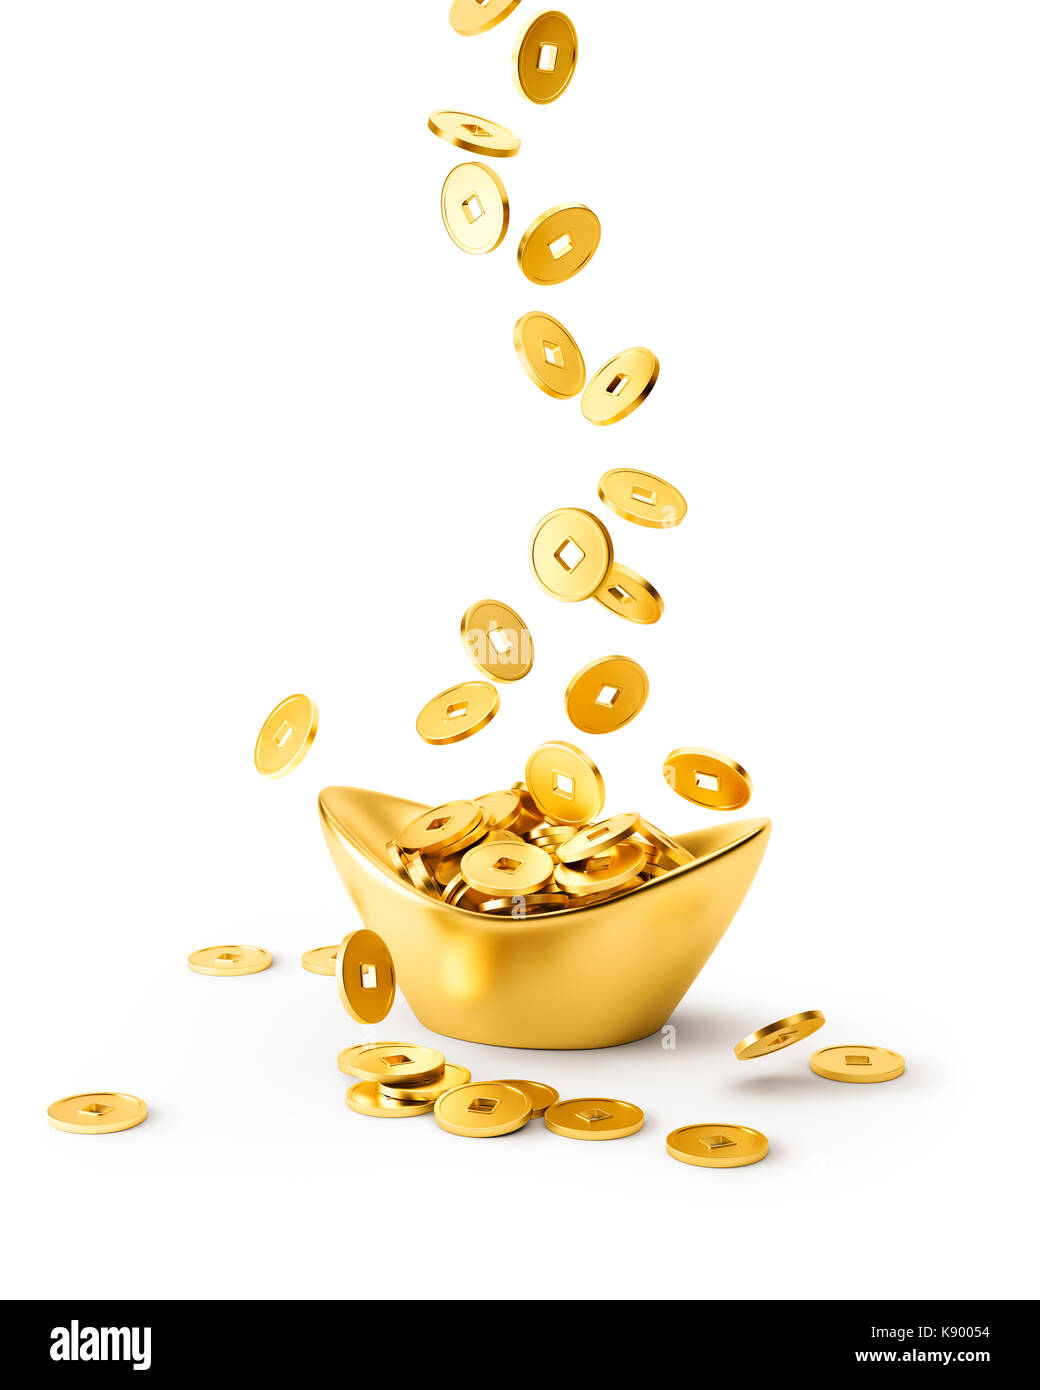 Gold coins dropping on gold sycee ( yuanbao ) isolated on white background Stock Photo